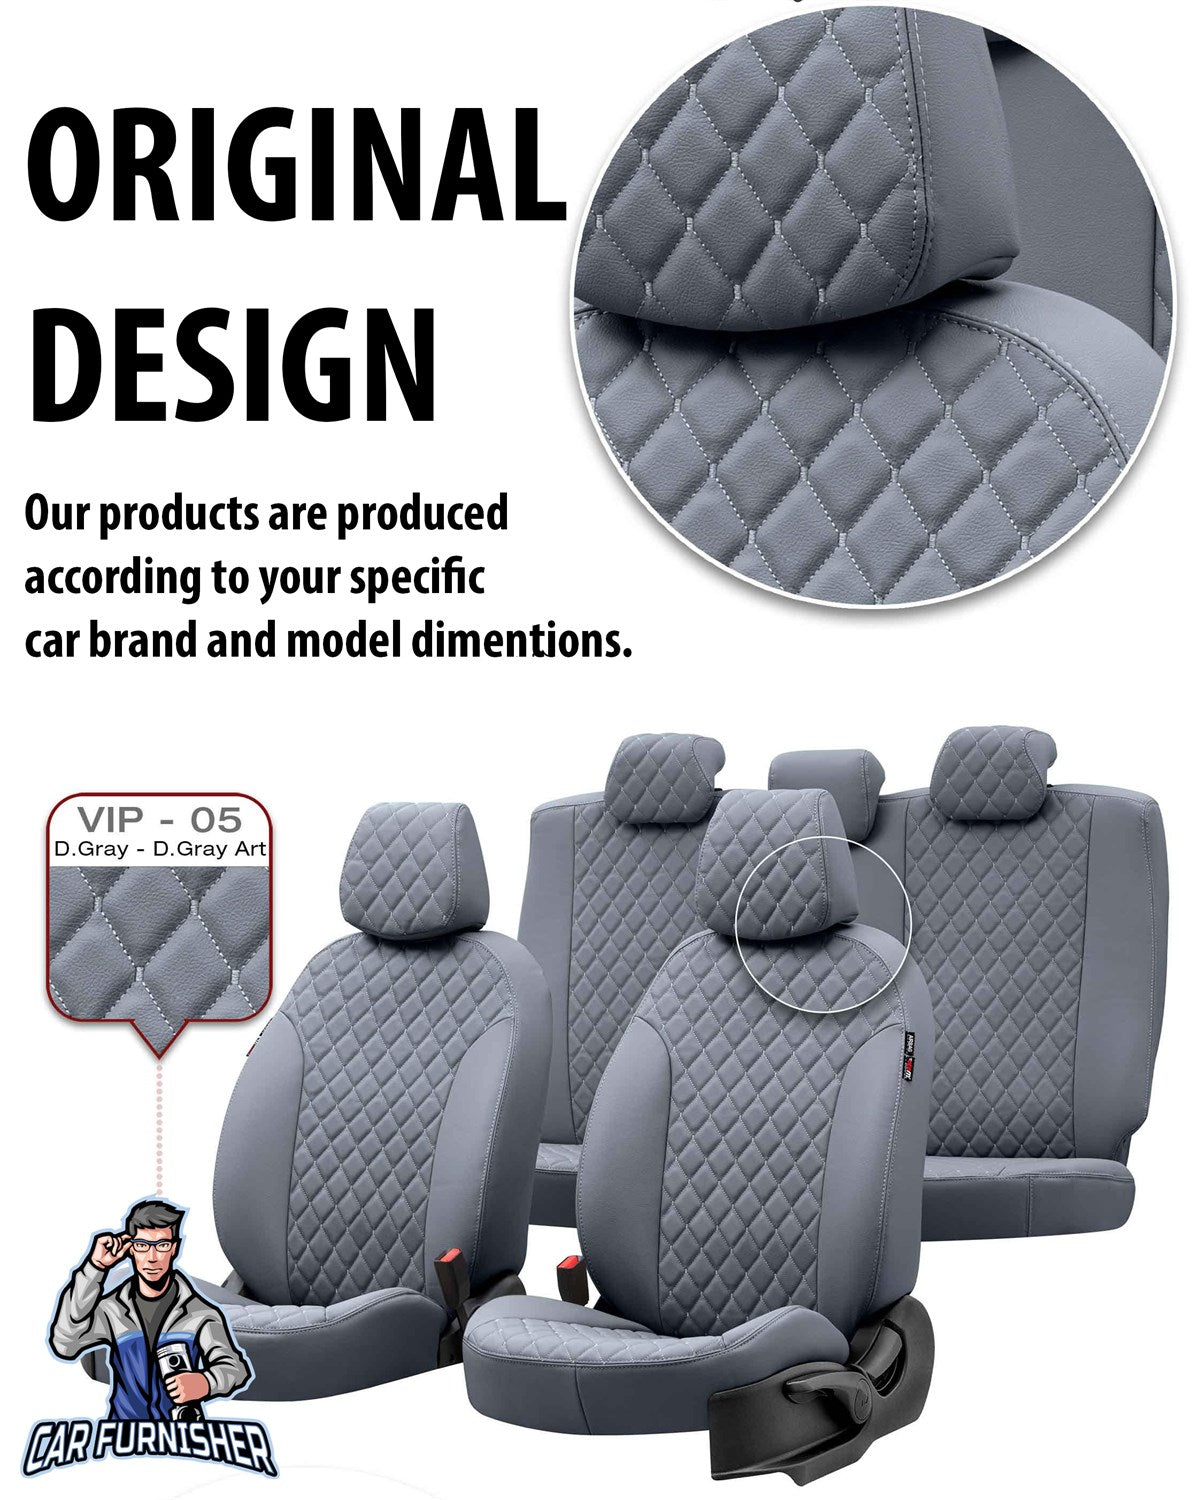 Ford Galaxy Seat Covers Madrid Leather Design Beige Leather